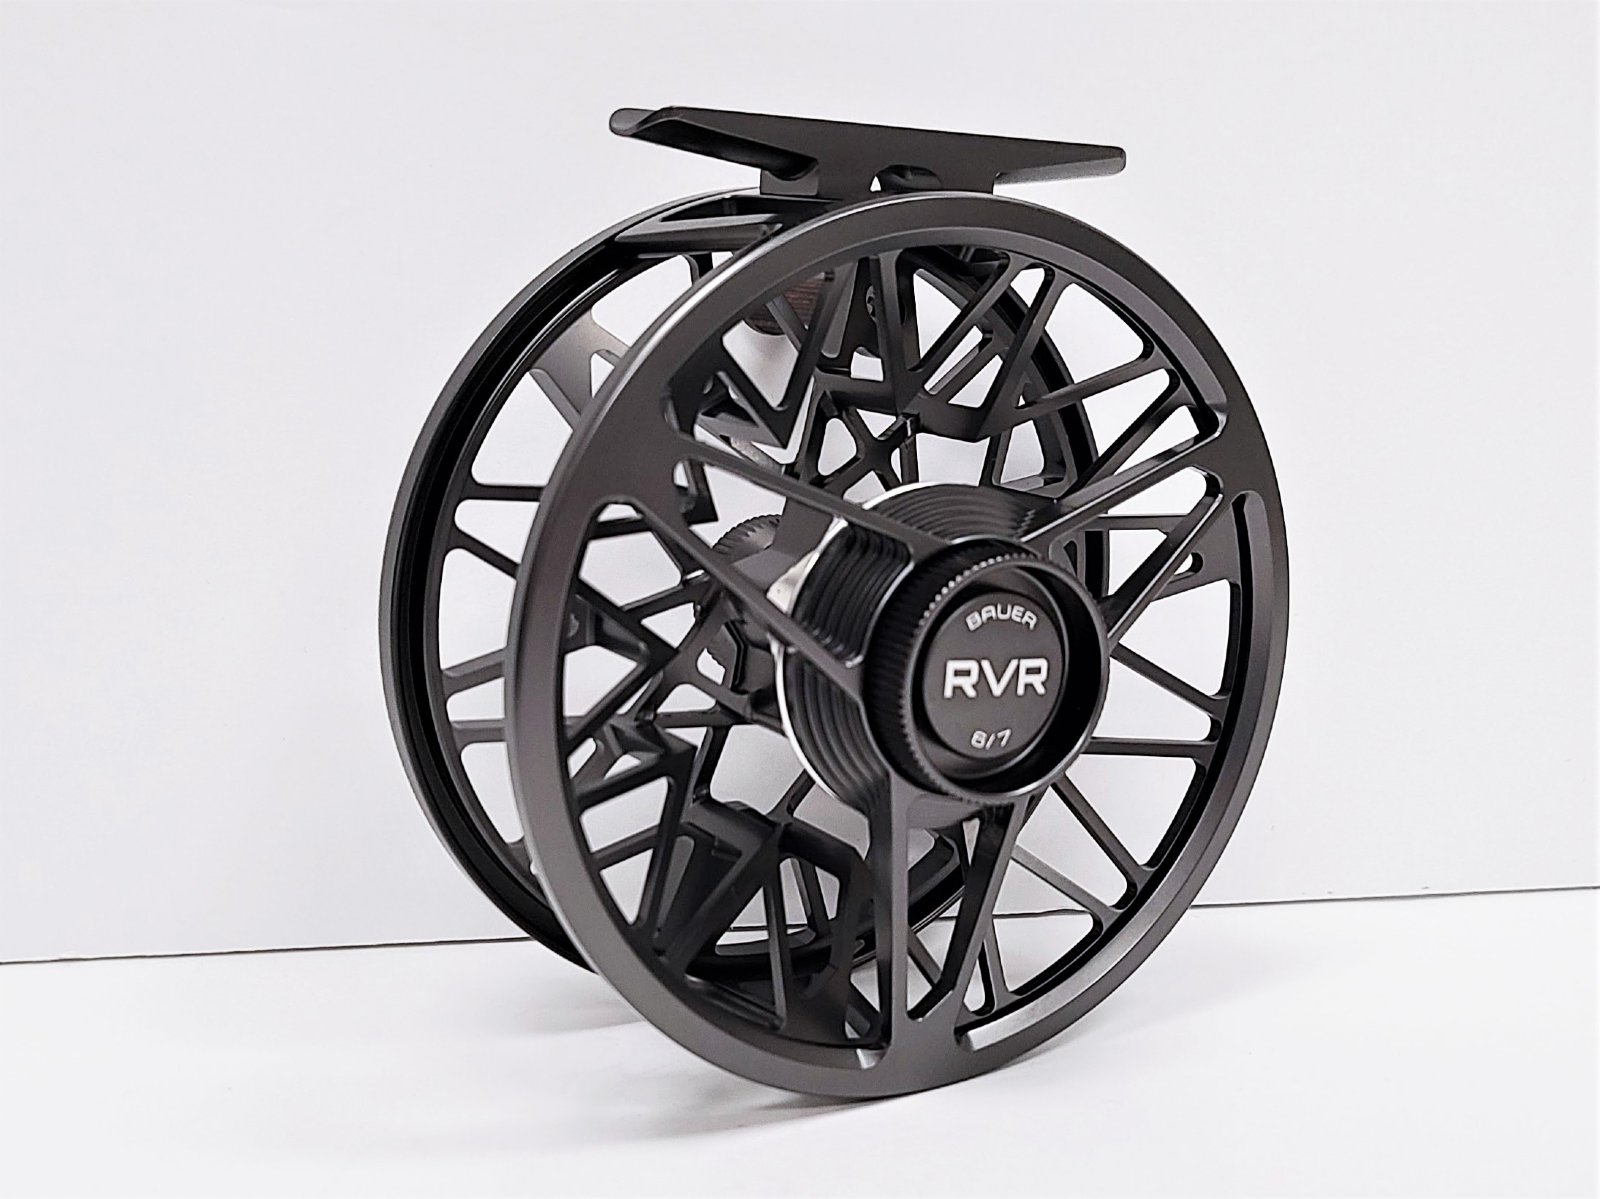 Bauer RVR Fly Reels - FREE FLY LINE